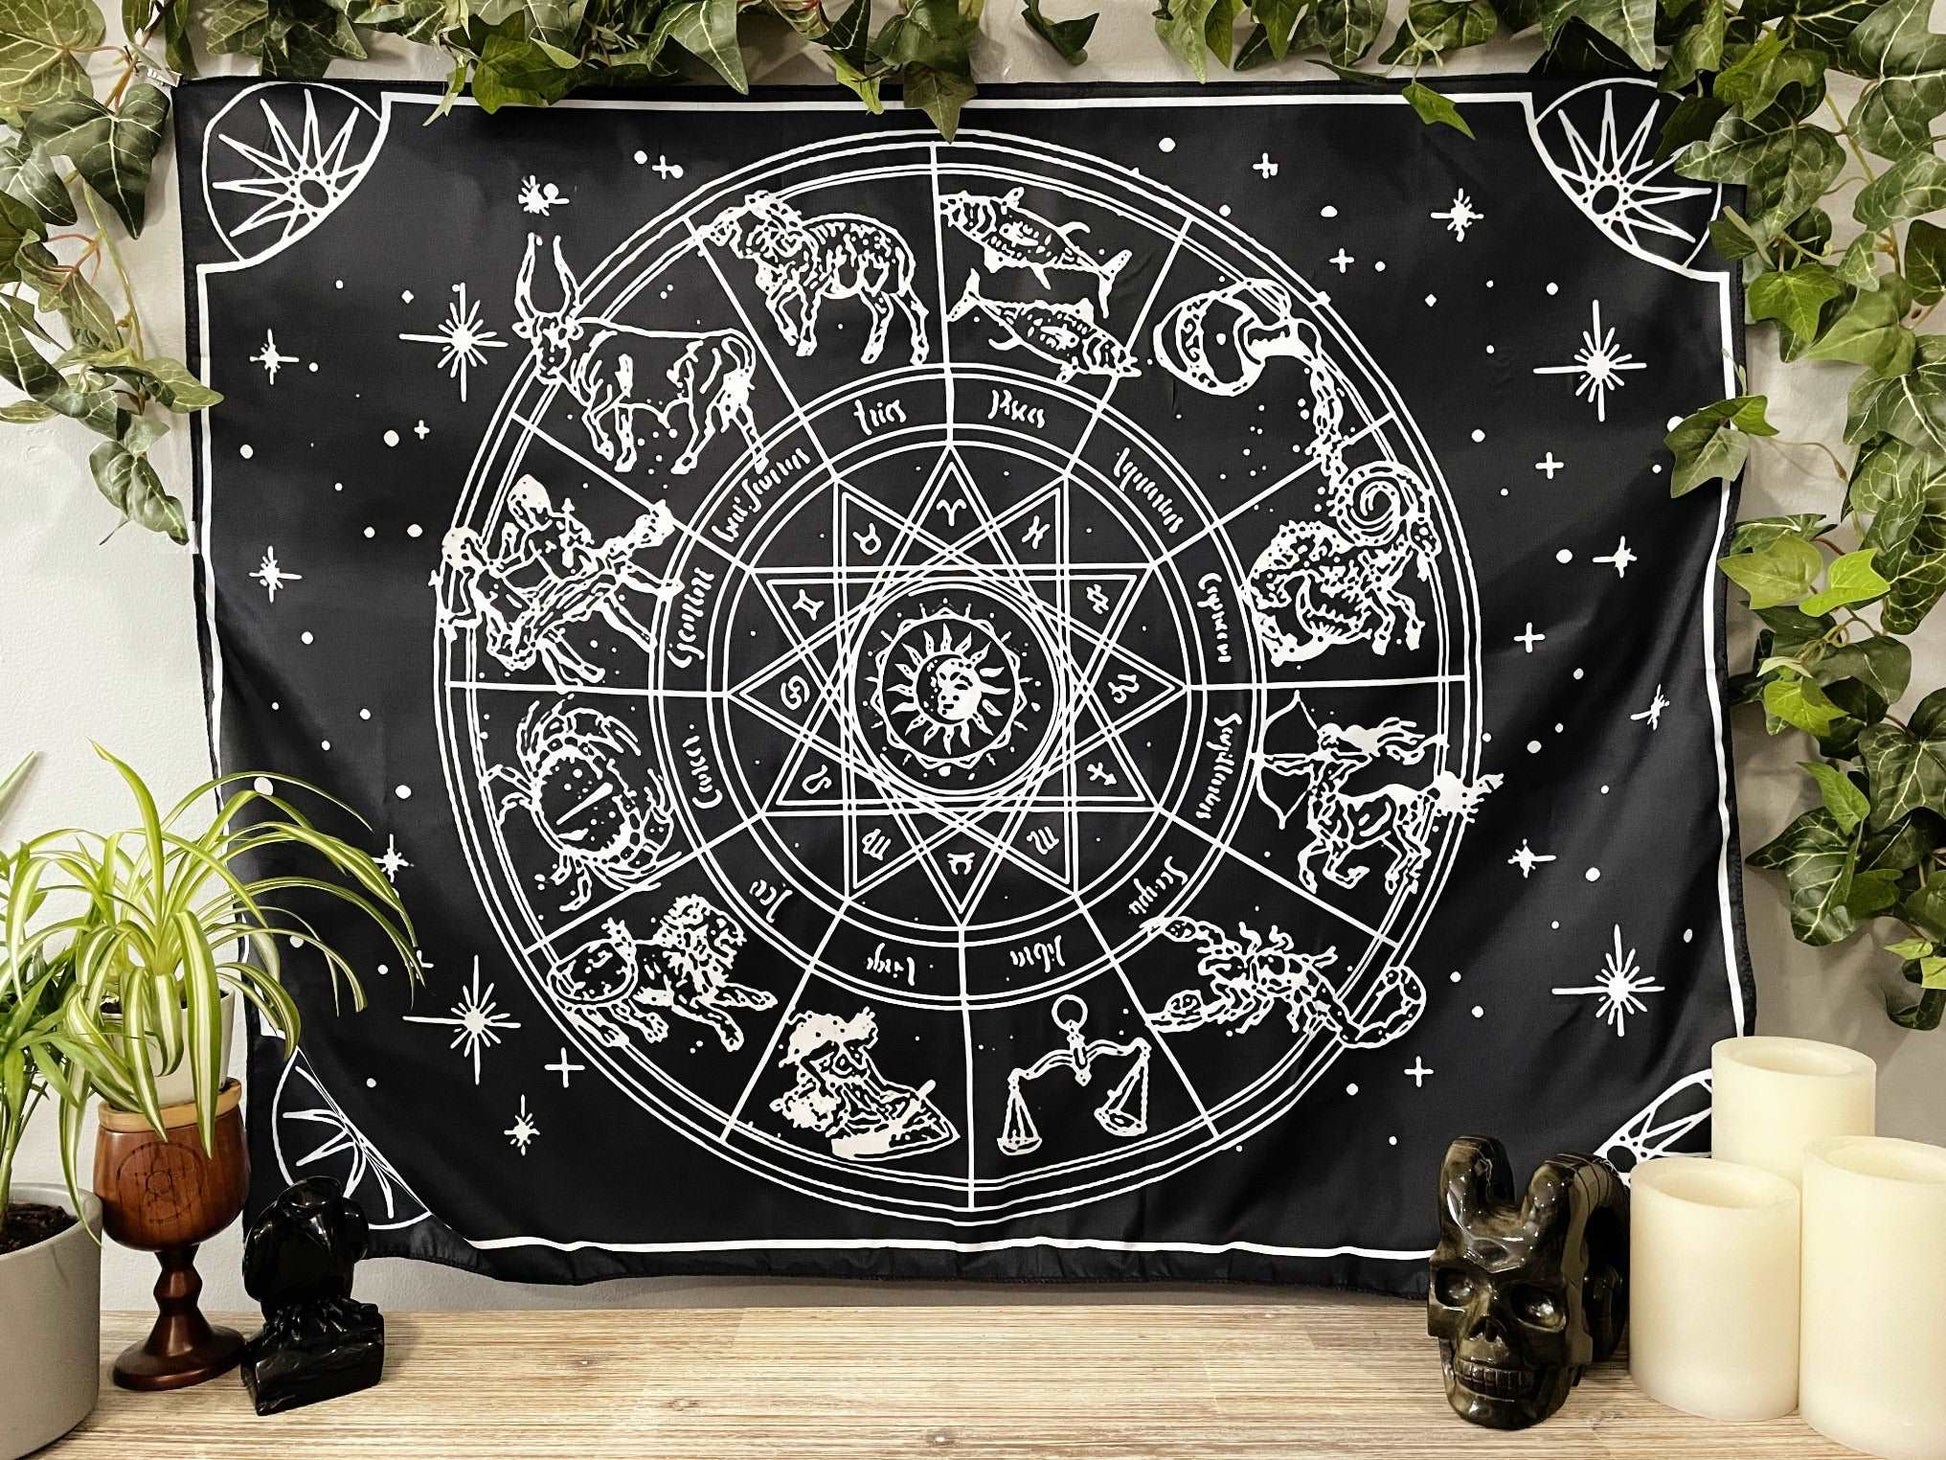 Pictured is a large wall tapestry with a black background and a large zodiac wheel printed in white on it.